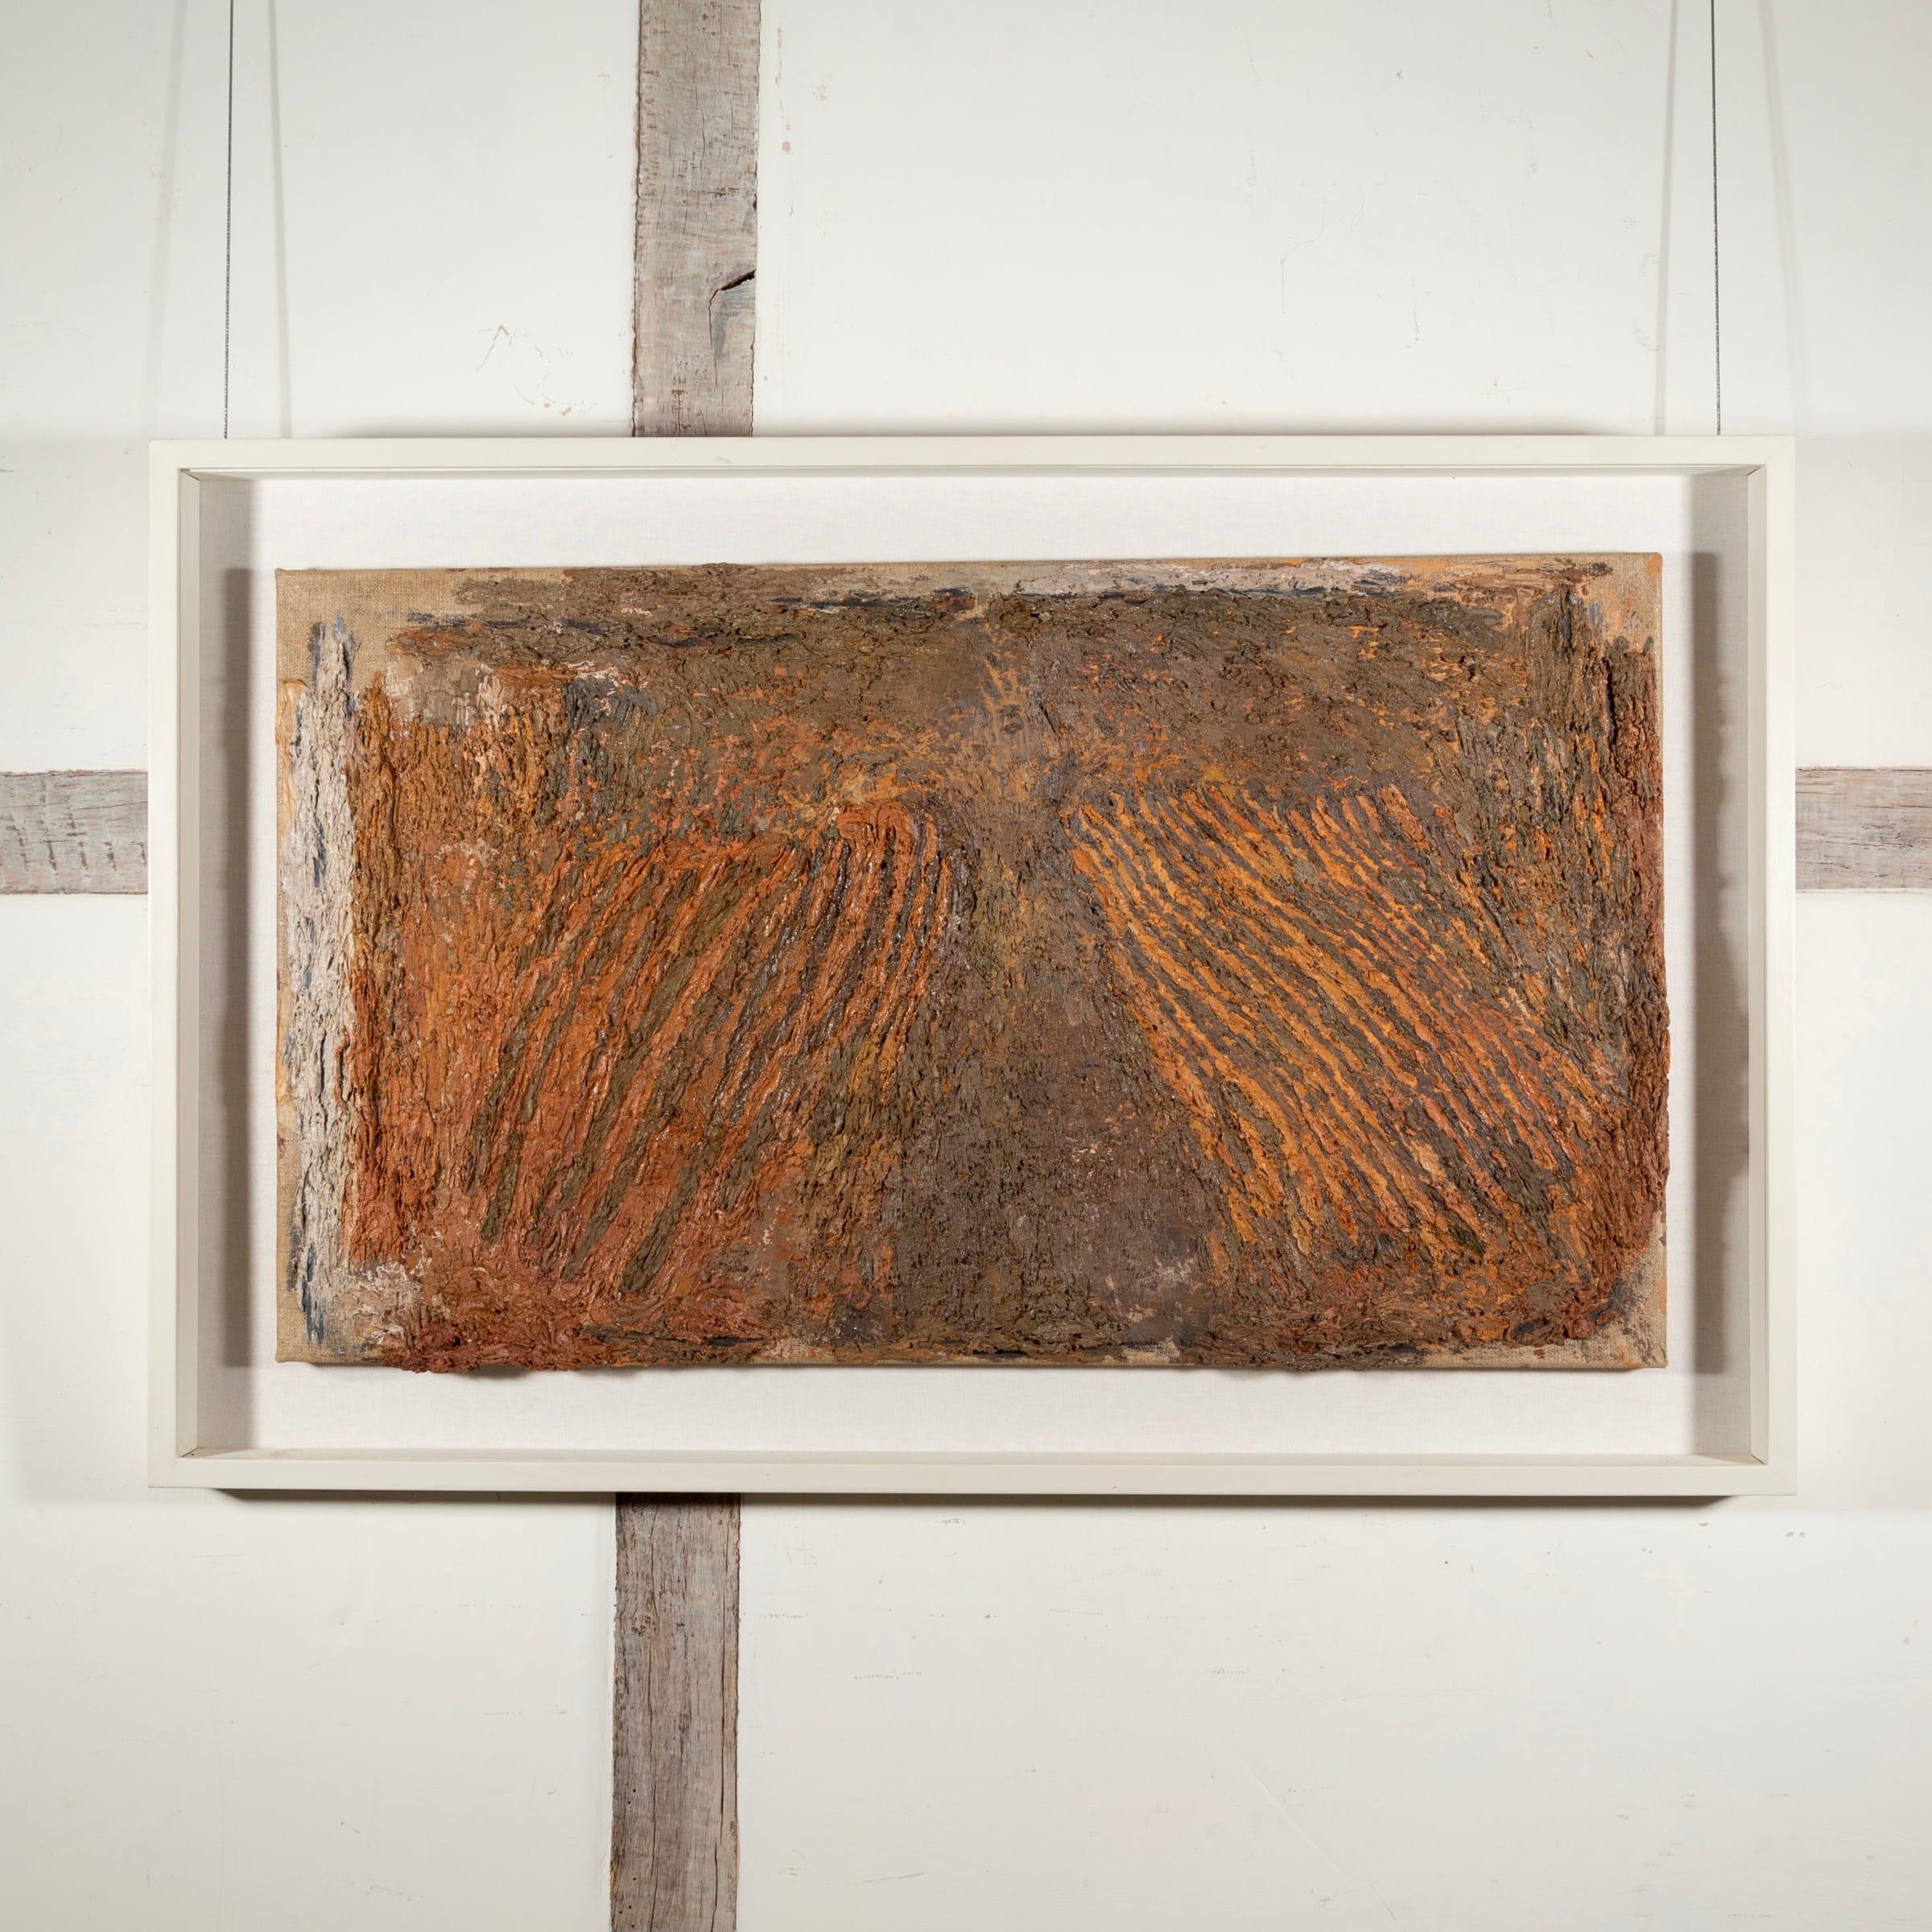 Oil and Pumice on Canvas 'Untitled (Orange)' Painting by Pamela Burns, 1990 For Sale 1